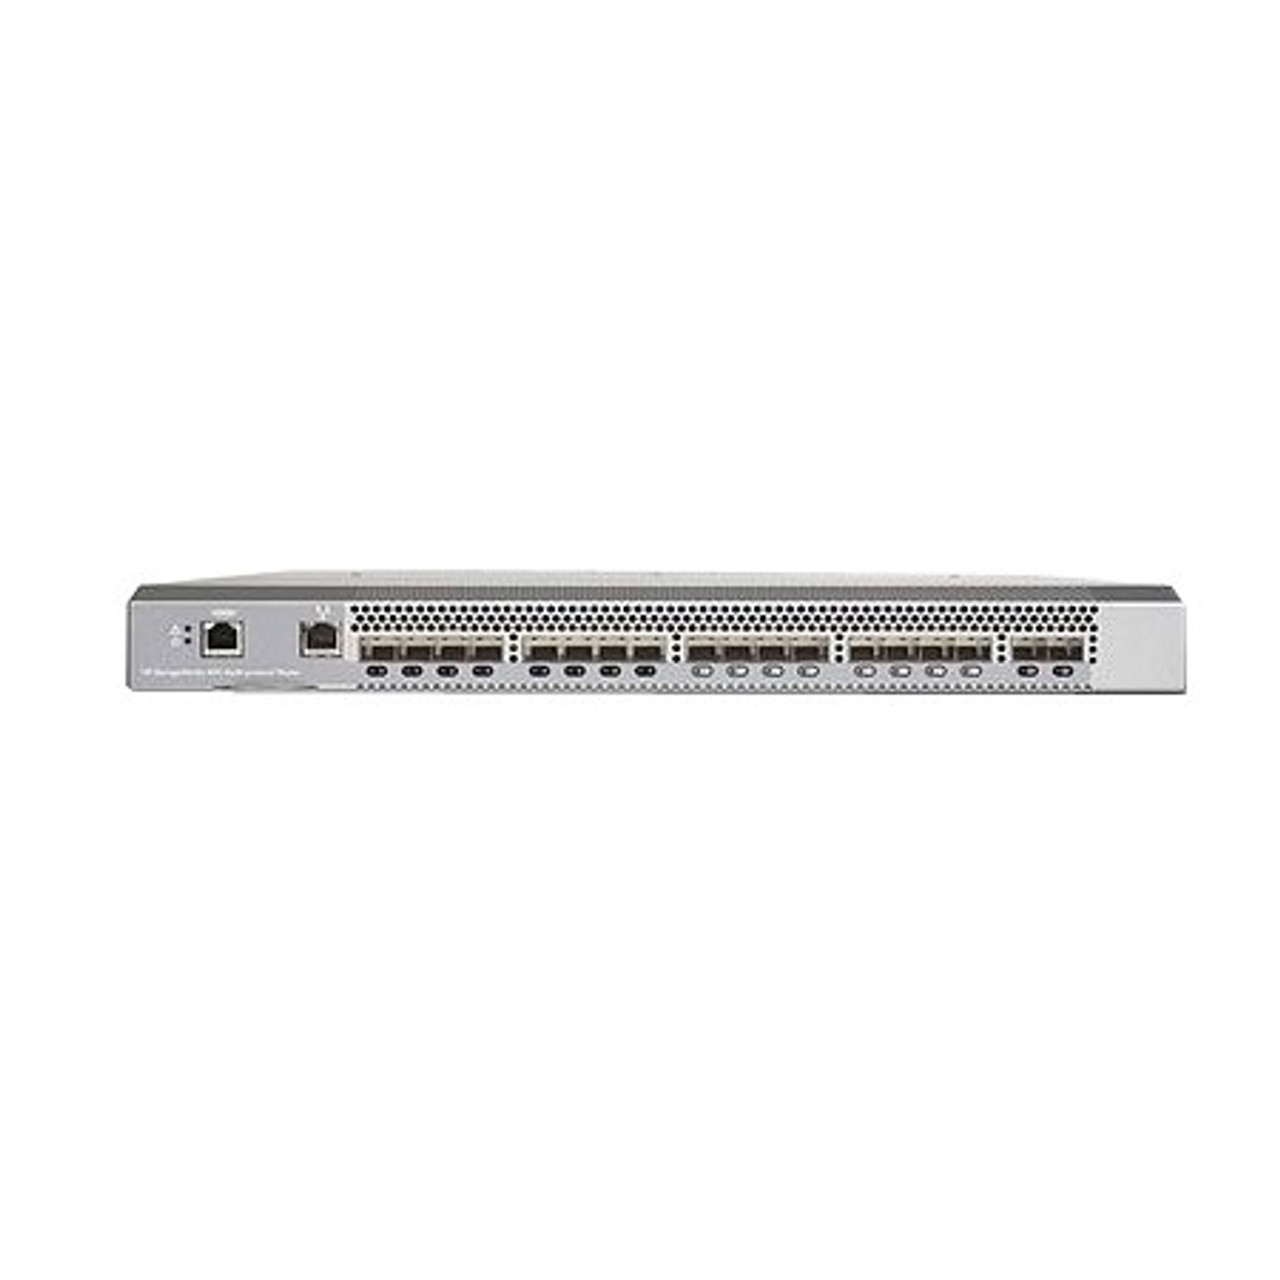 537578-002 - HP StorageWorks Mpx200 Multifunction ROuter 1 Gbe Upgrade Blade Storage ROuter 8GB Fibre Channel iSCSI